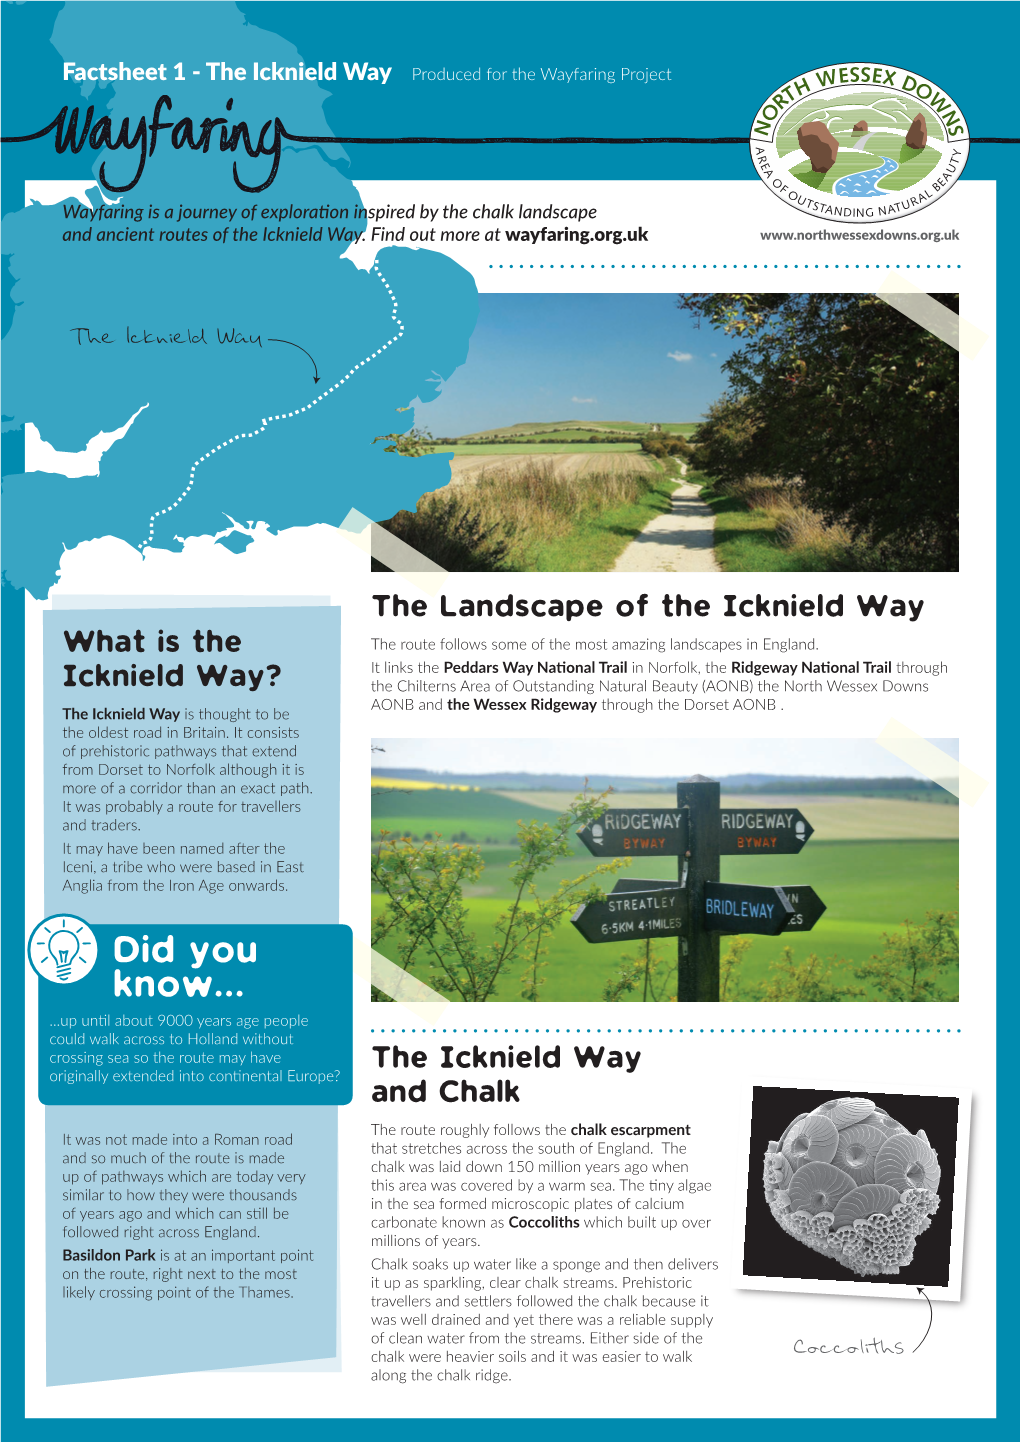 Factsheet 1 - the Icknield Way Produced for the Wayfaring Project